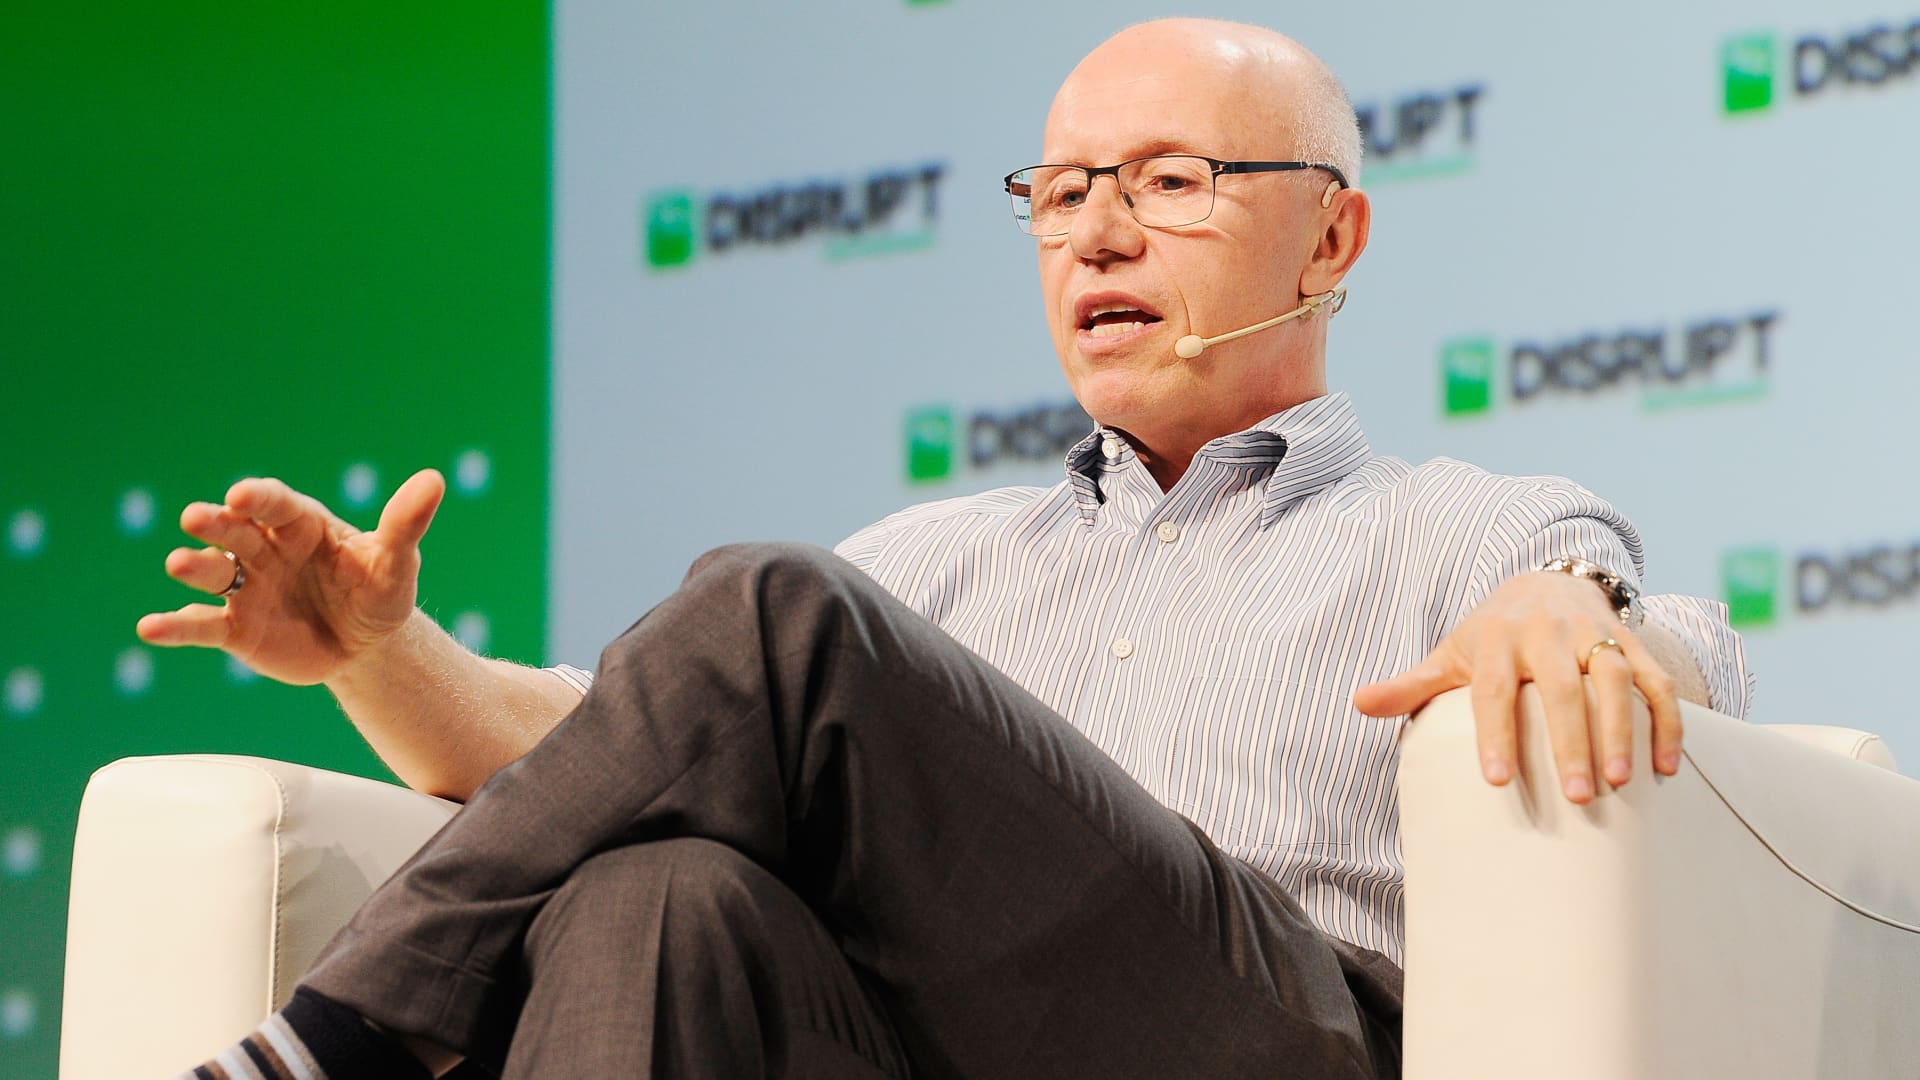 Get ready for a prolonged downturn that’s worse than 2000 or 2008, billionaire VC Doug Leone says